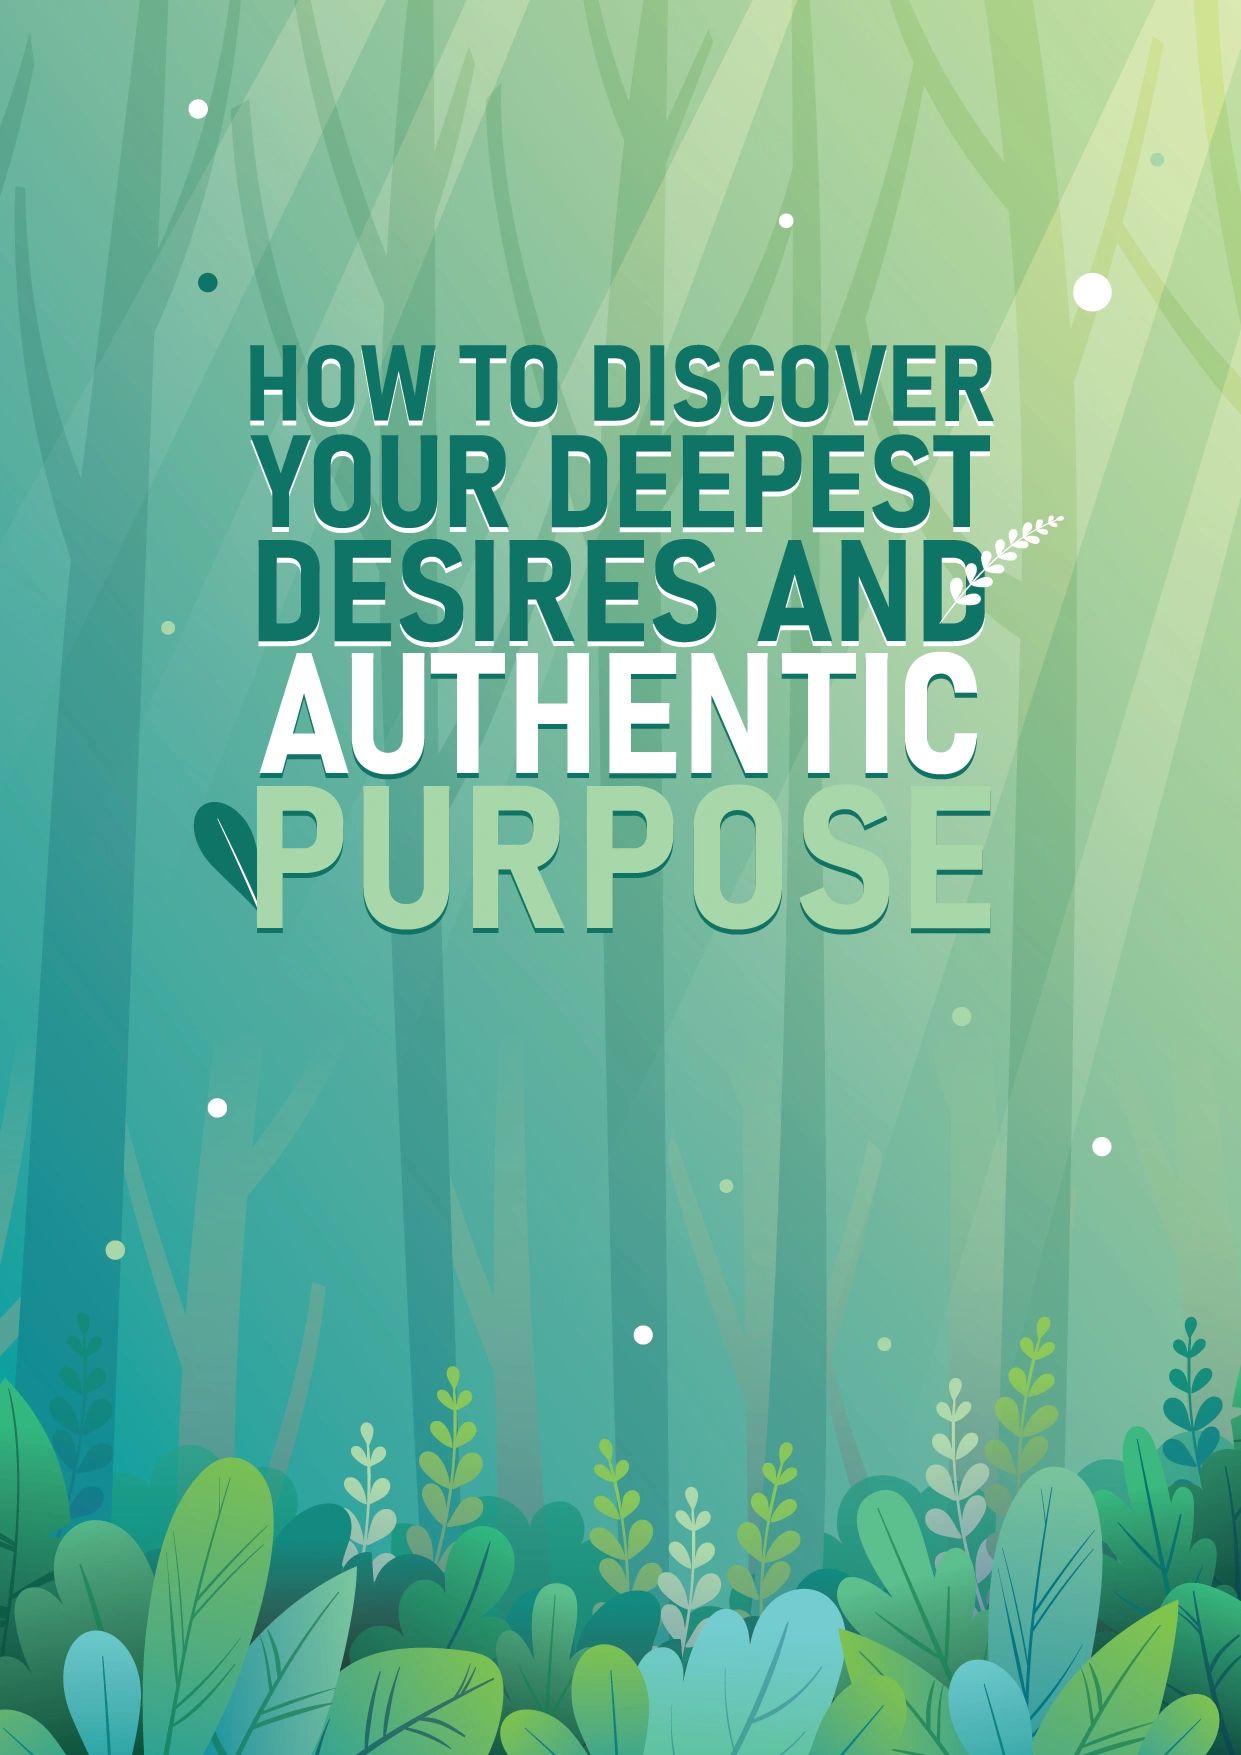 100 Ways to Discover Your Deepest Desires